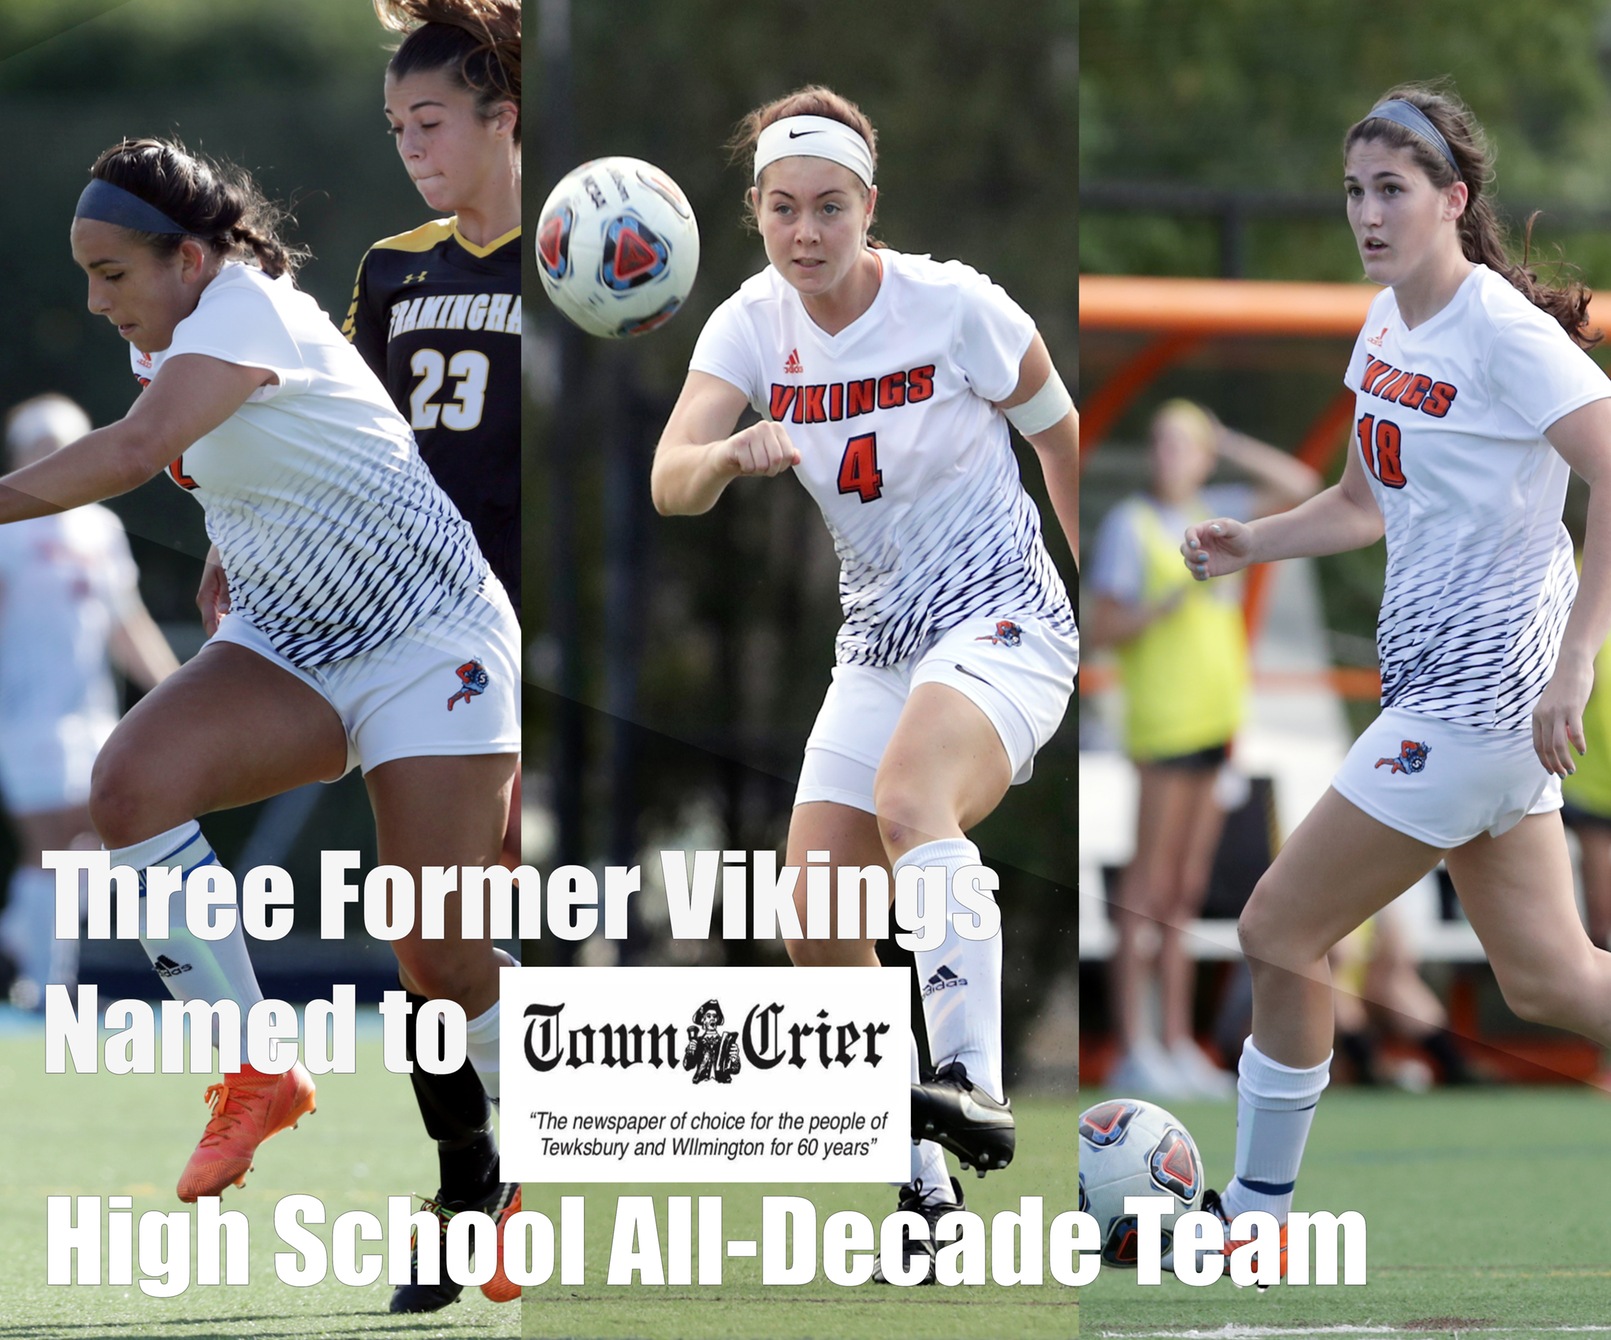 Curley, Malatesta and McFall Named to Wilmington Town Crier High School All-Decade Team